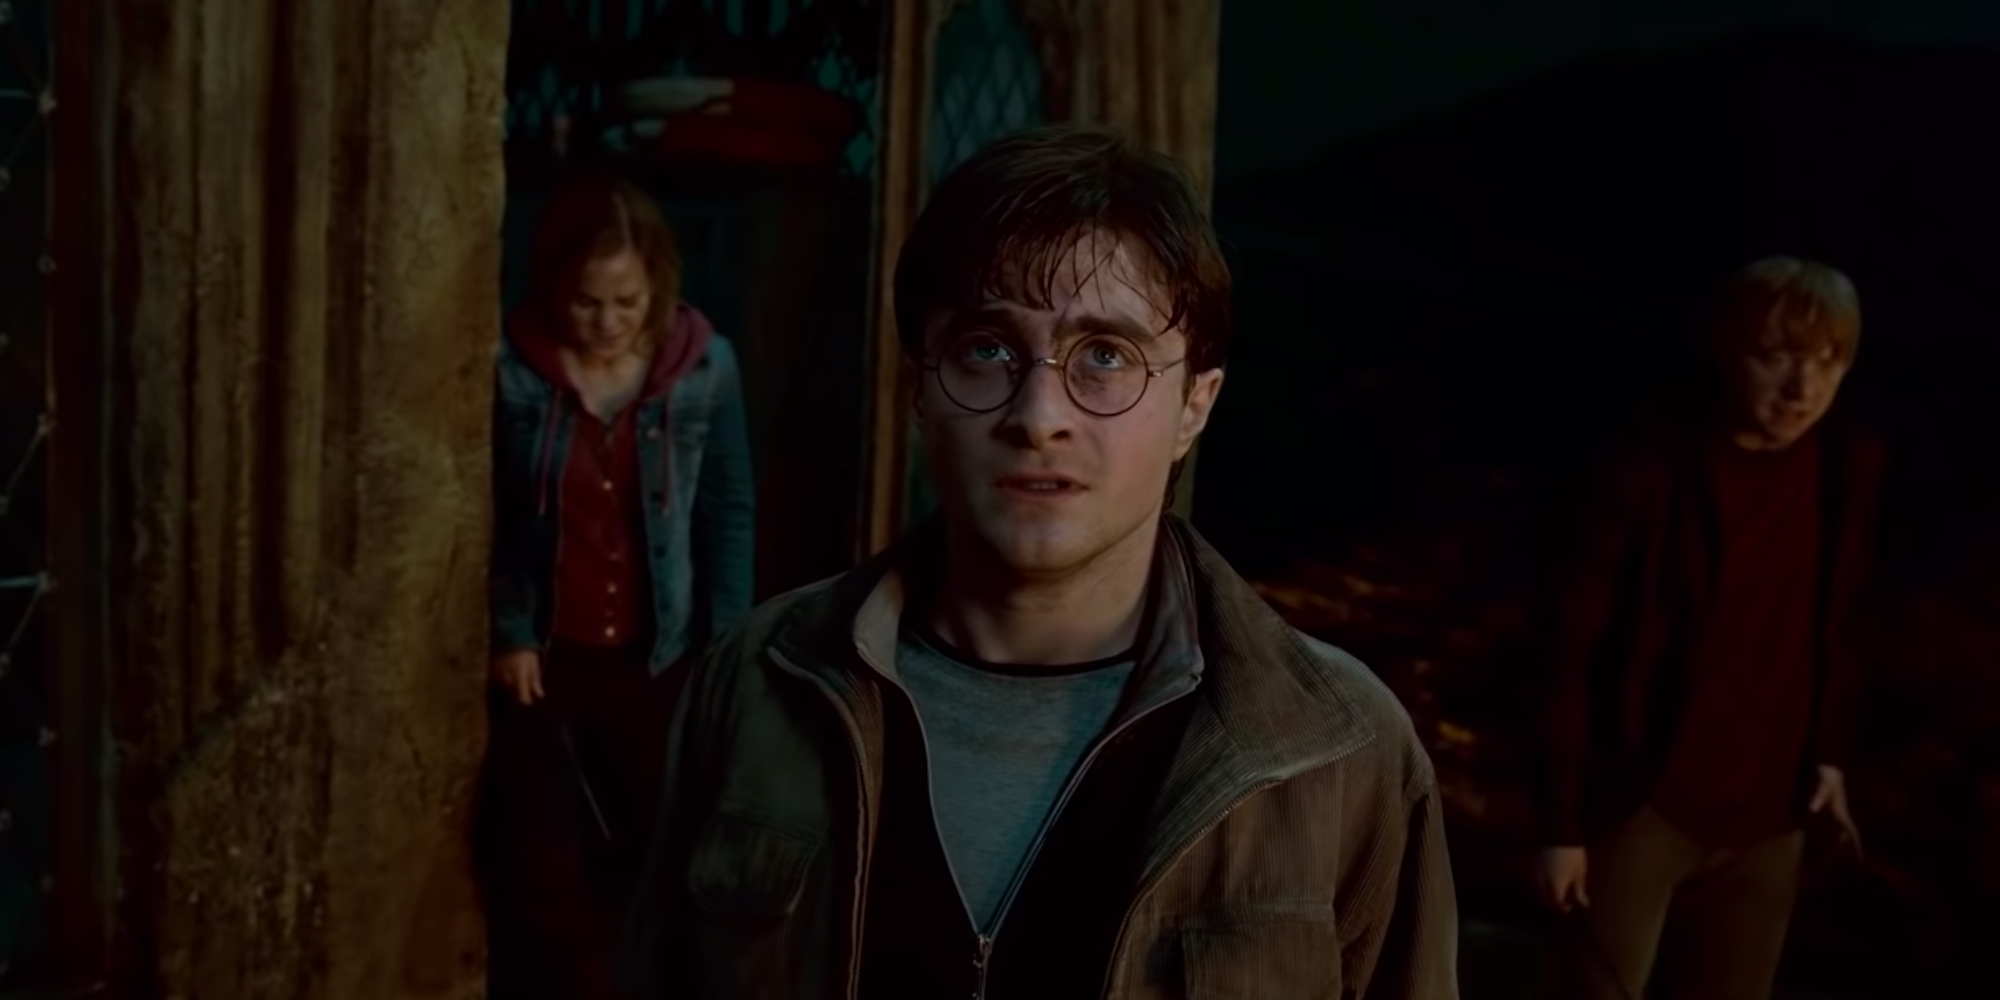 Harry Potter Movies: All 10 'Harry Potter' Films Ranked from Best to Worst